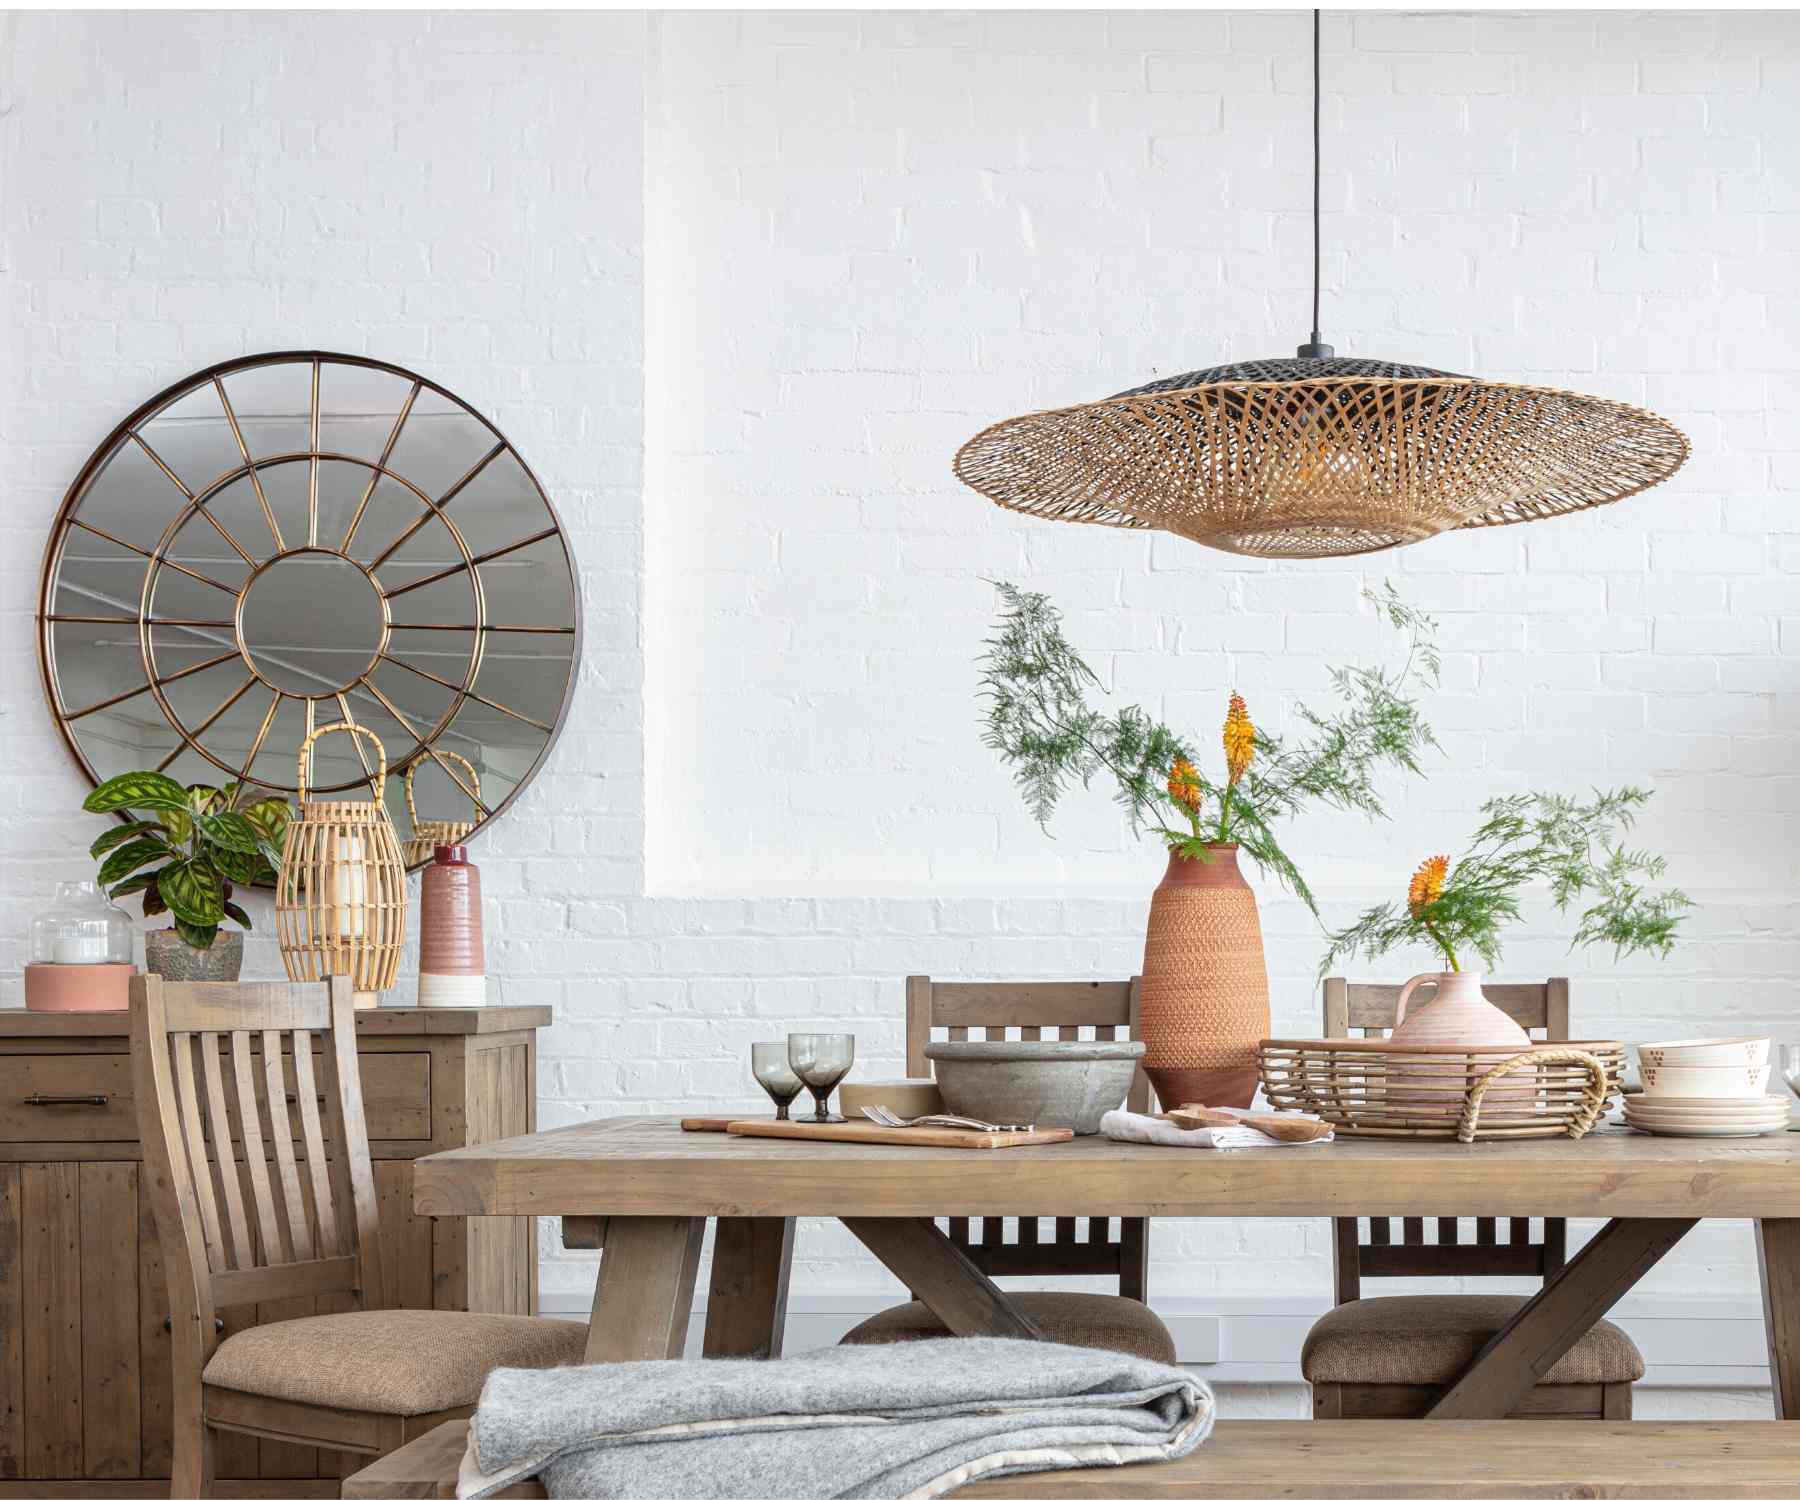 Round wall mirror next to reclaimed wood dining table with hanging pendant light